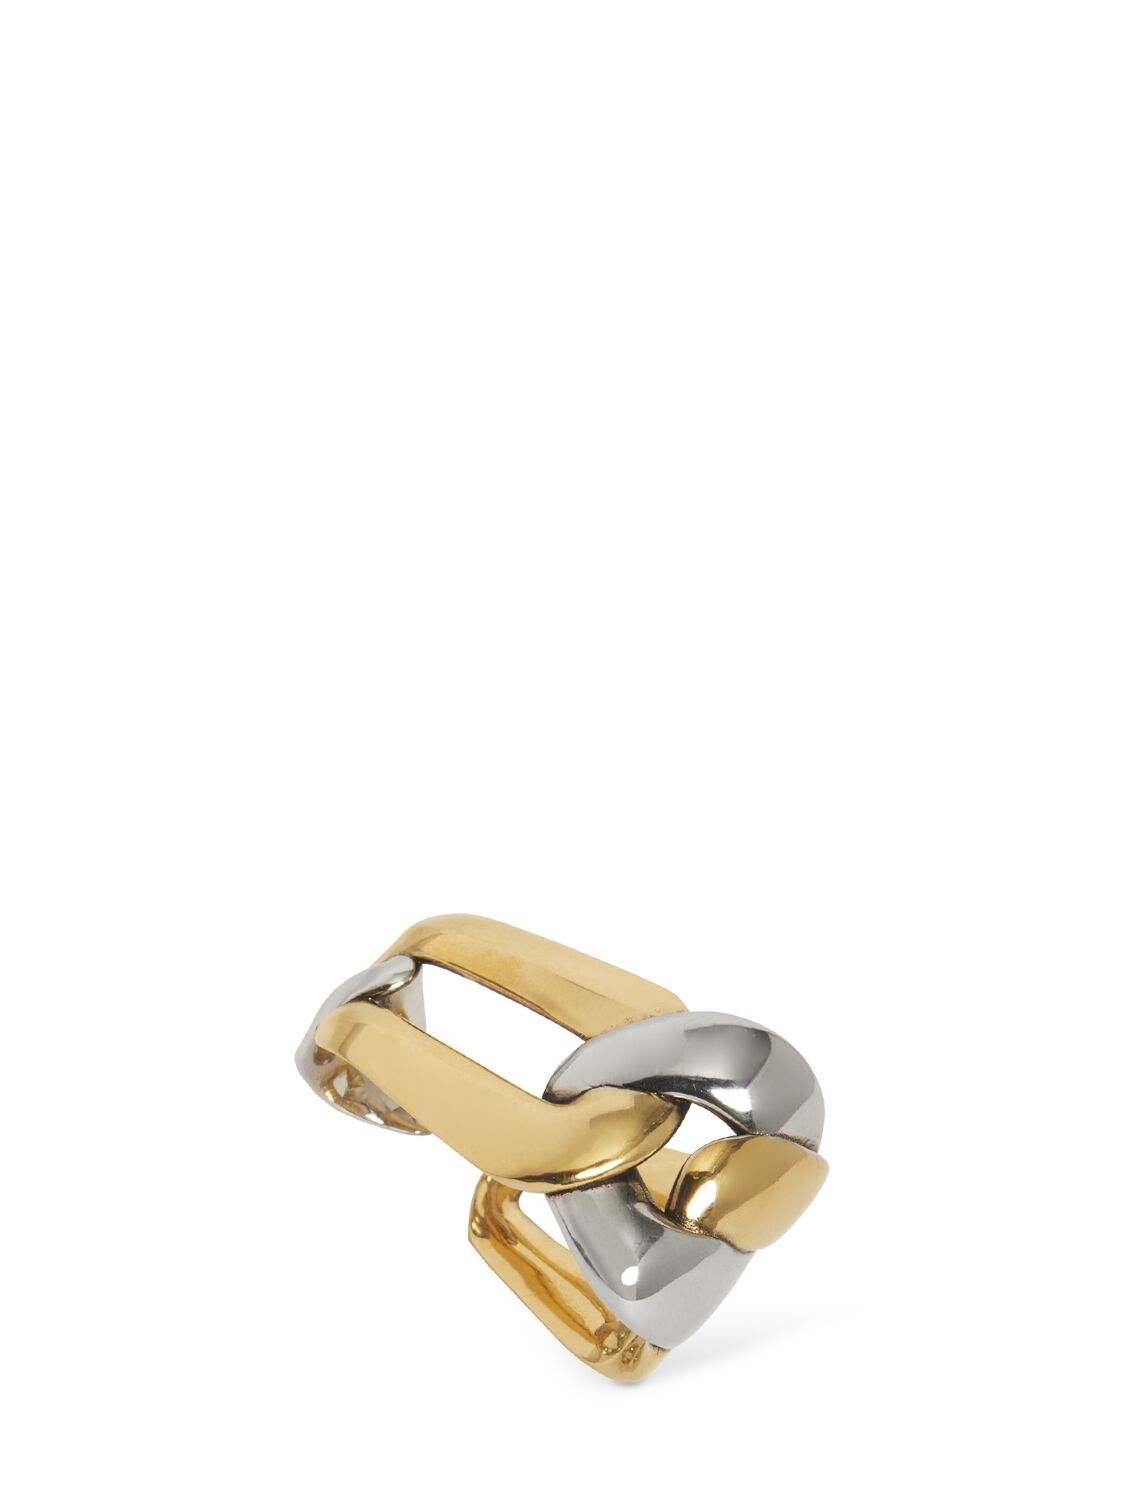 Alexander Mcqueen Double Chain Brass Ring In Gold/silver